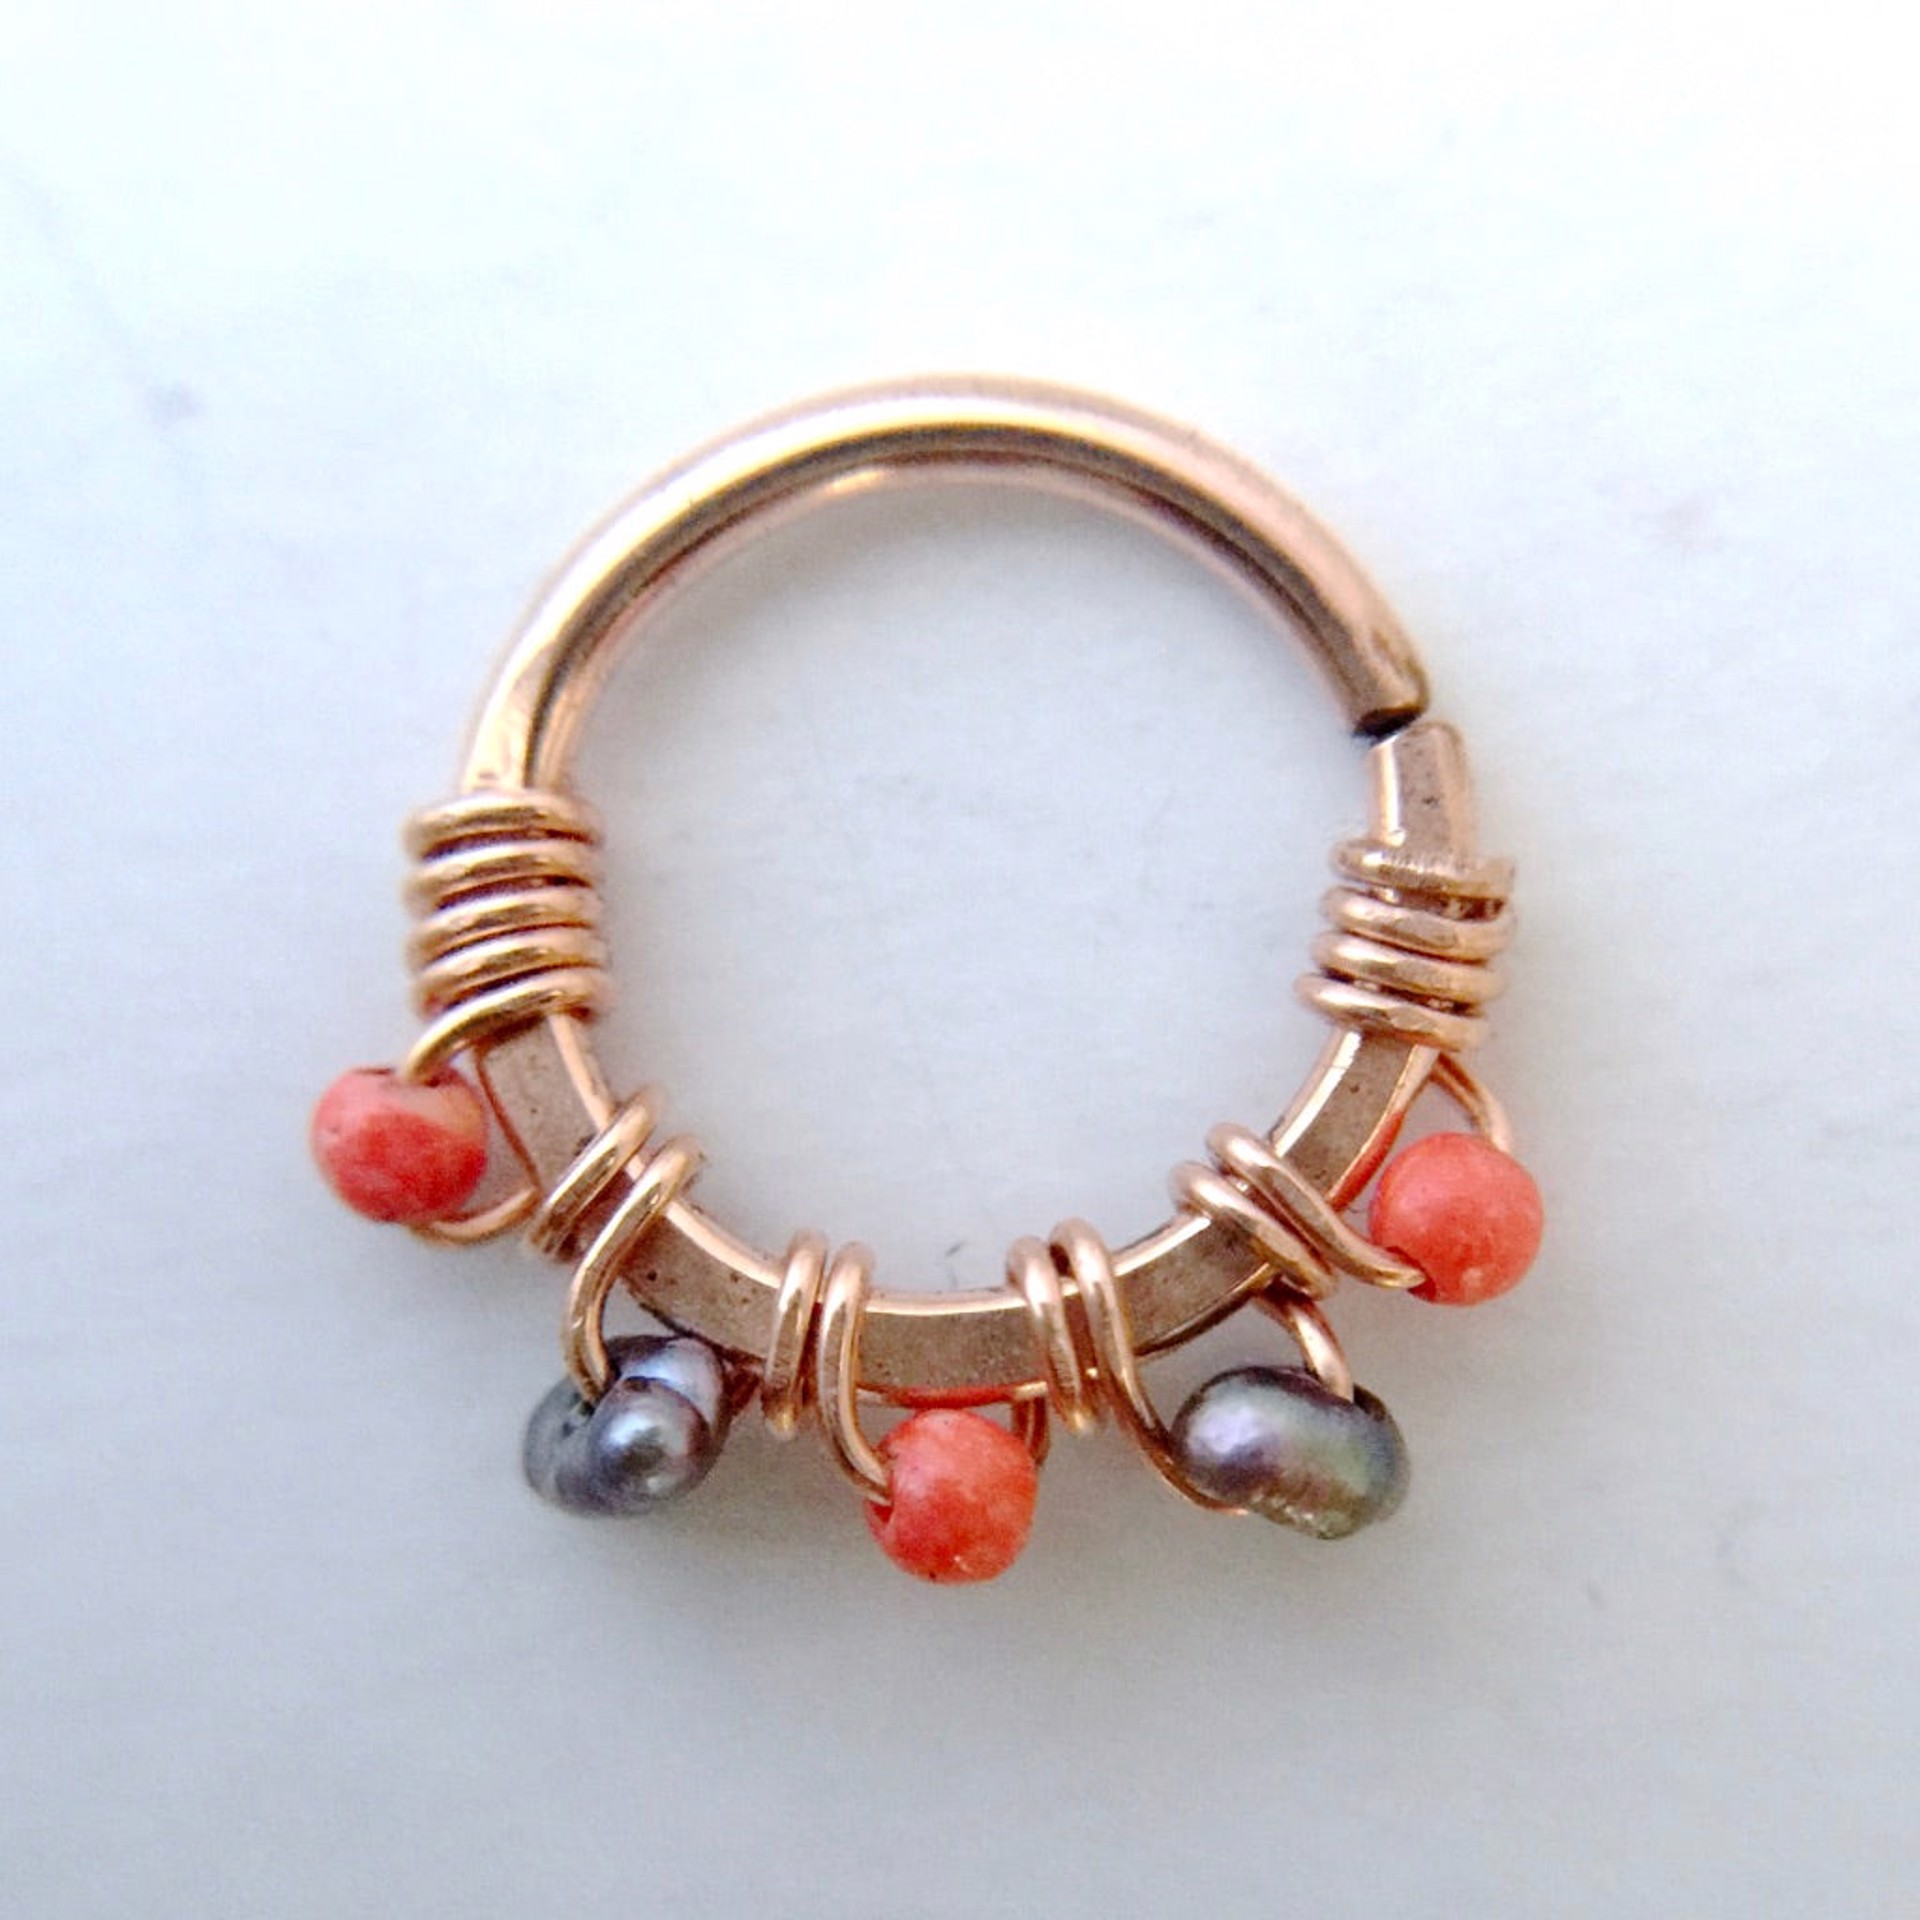 Jeweled Septum Ring in Rose Gold - 8mm by Clementine & Co. Jewelry